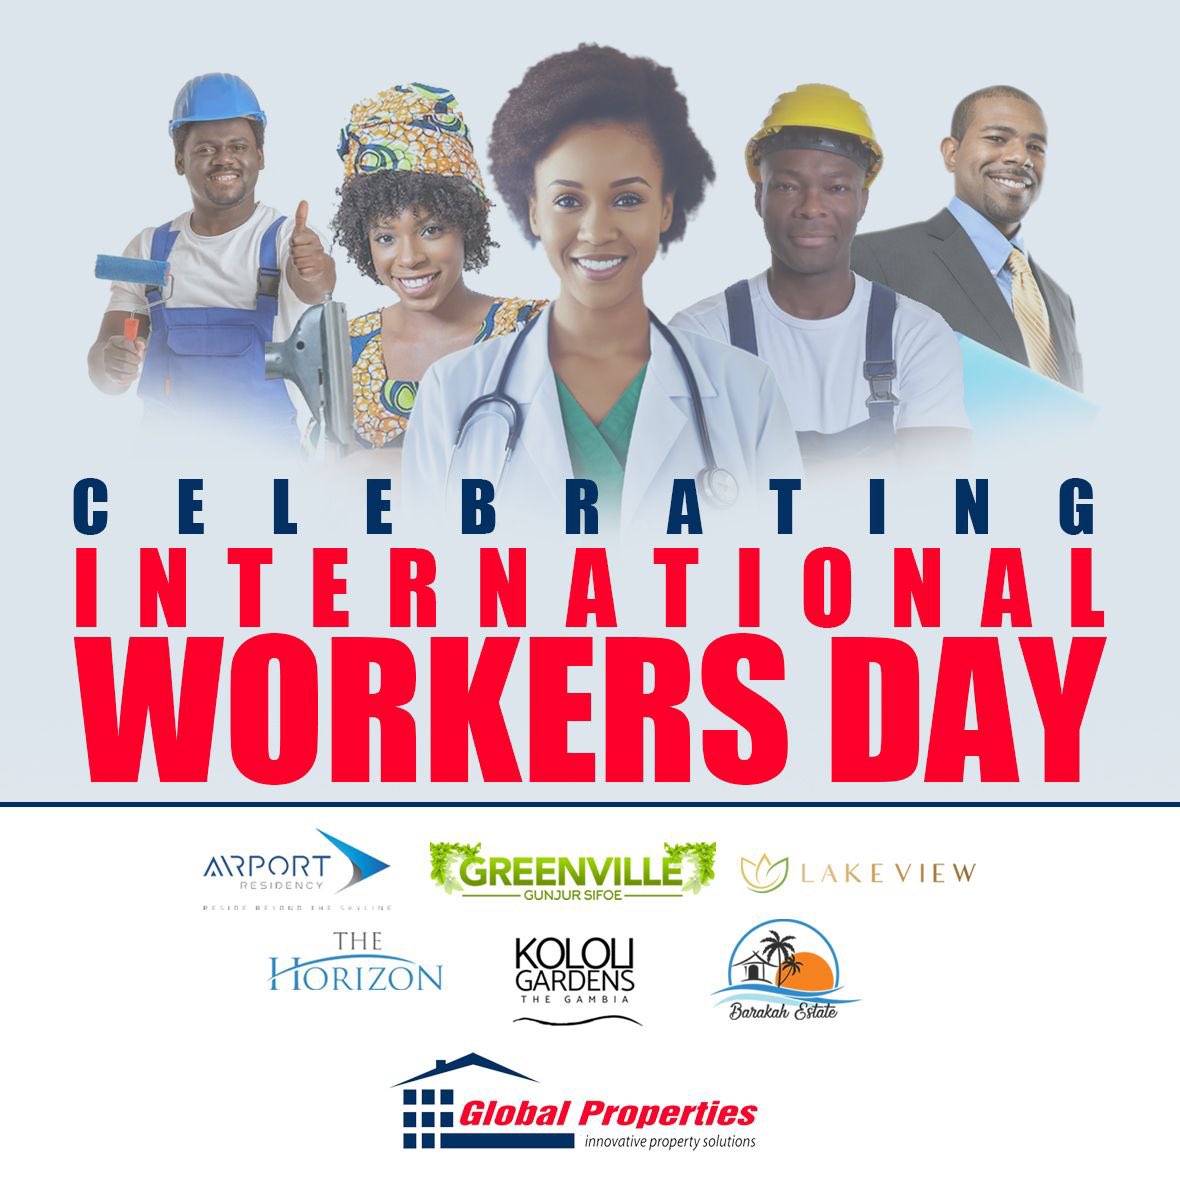 Today and every day, we honor the backbone of Global Properties: our dedicated workers, both in the office and out on various project sites. Their hard work and commitment drive us forward. Happy #InternationalWorkersDay!

#SaulFRAZER  #GlobalProperties #RealEstate  #May1st